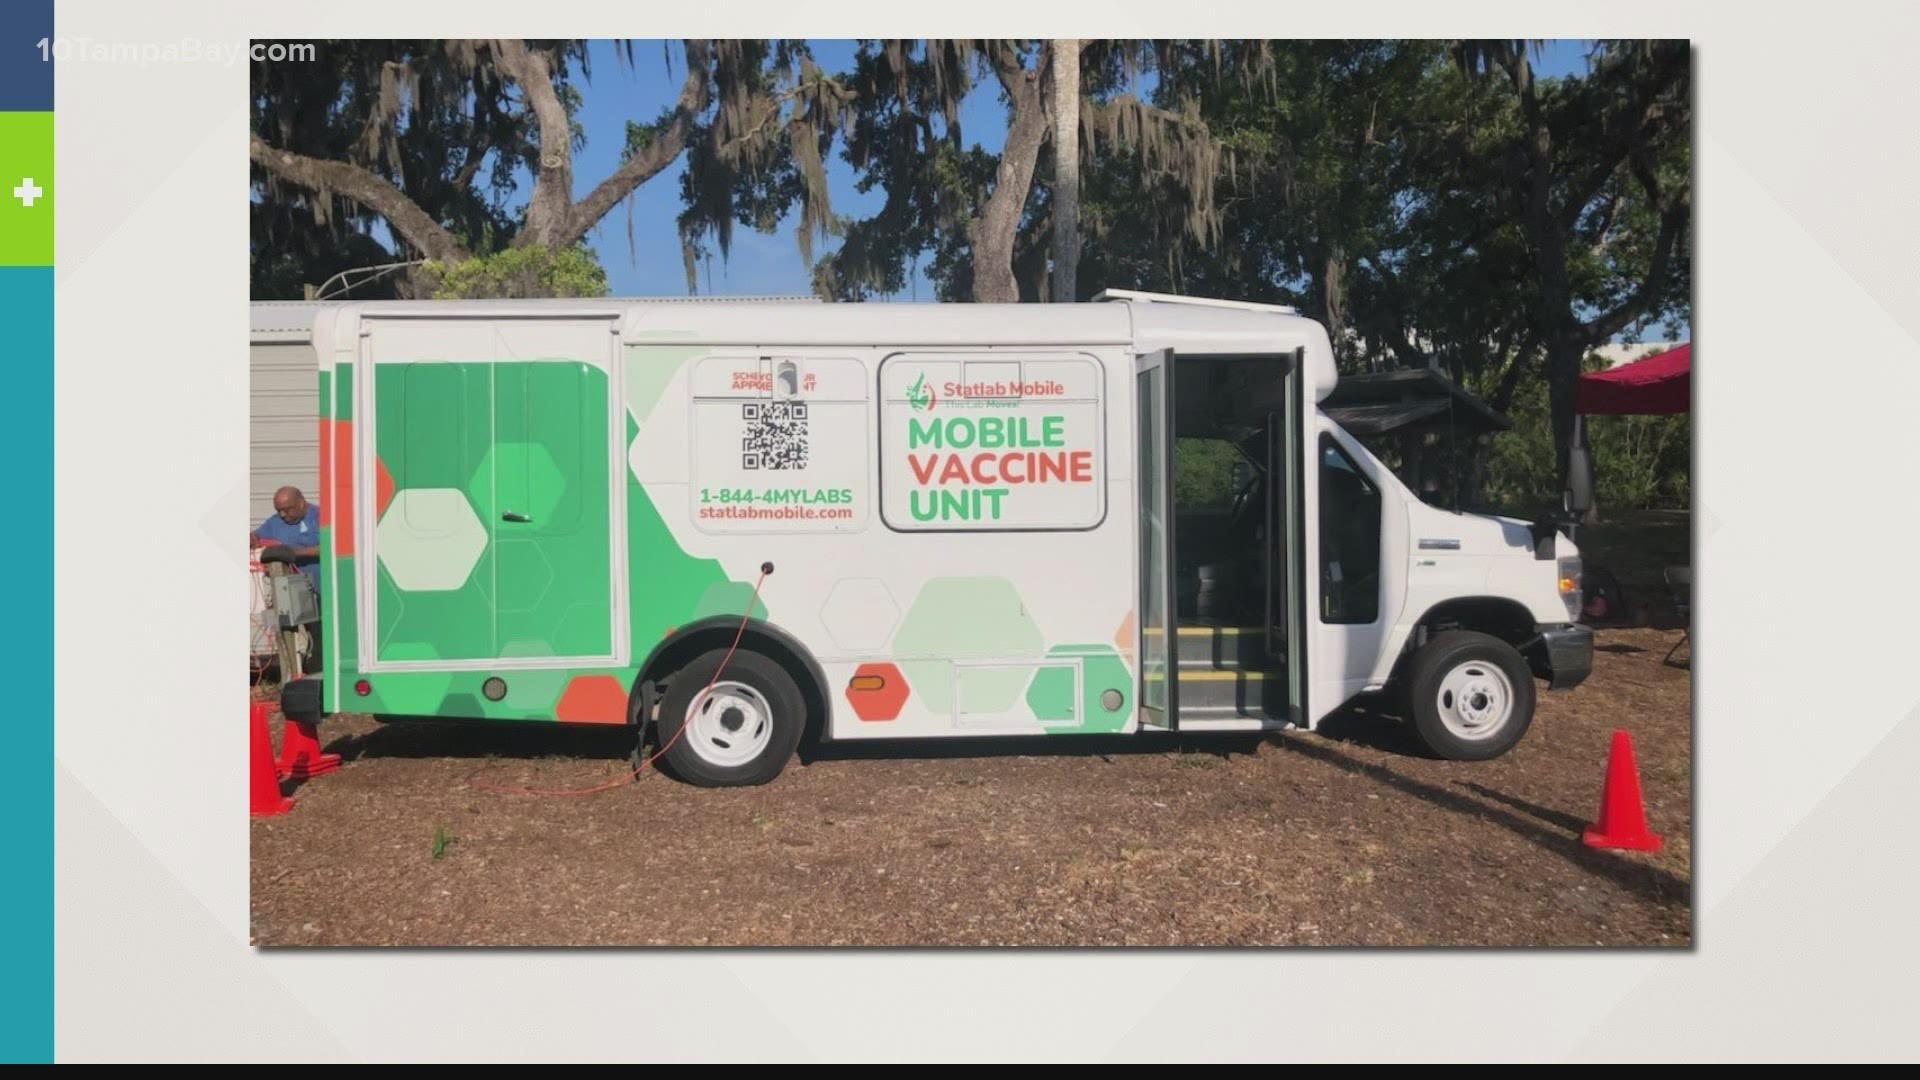 With state-run vaccination sites closing, mobile units are key to offering access to COVID-19 vaccines.